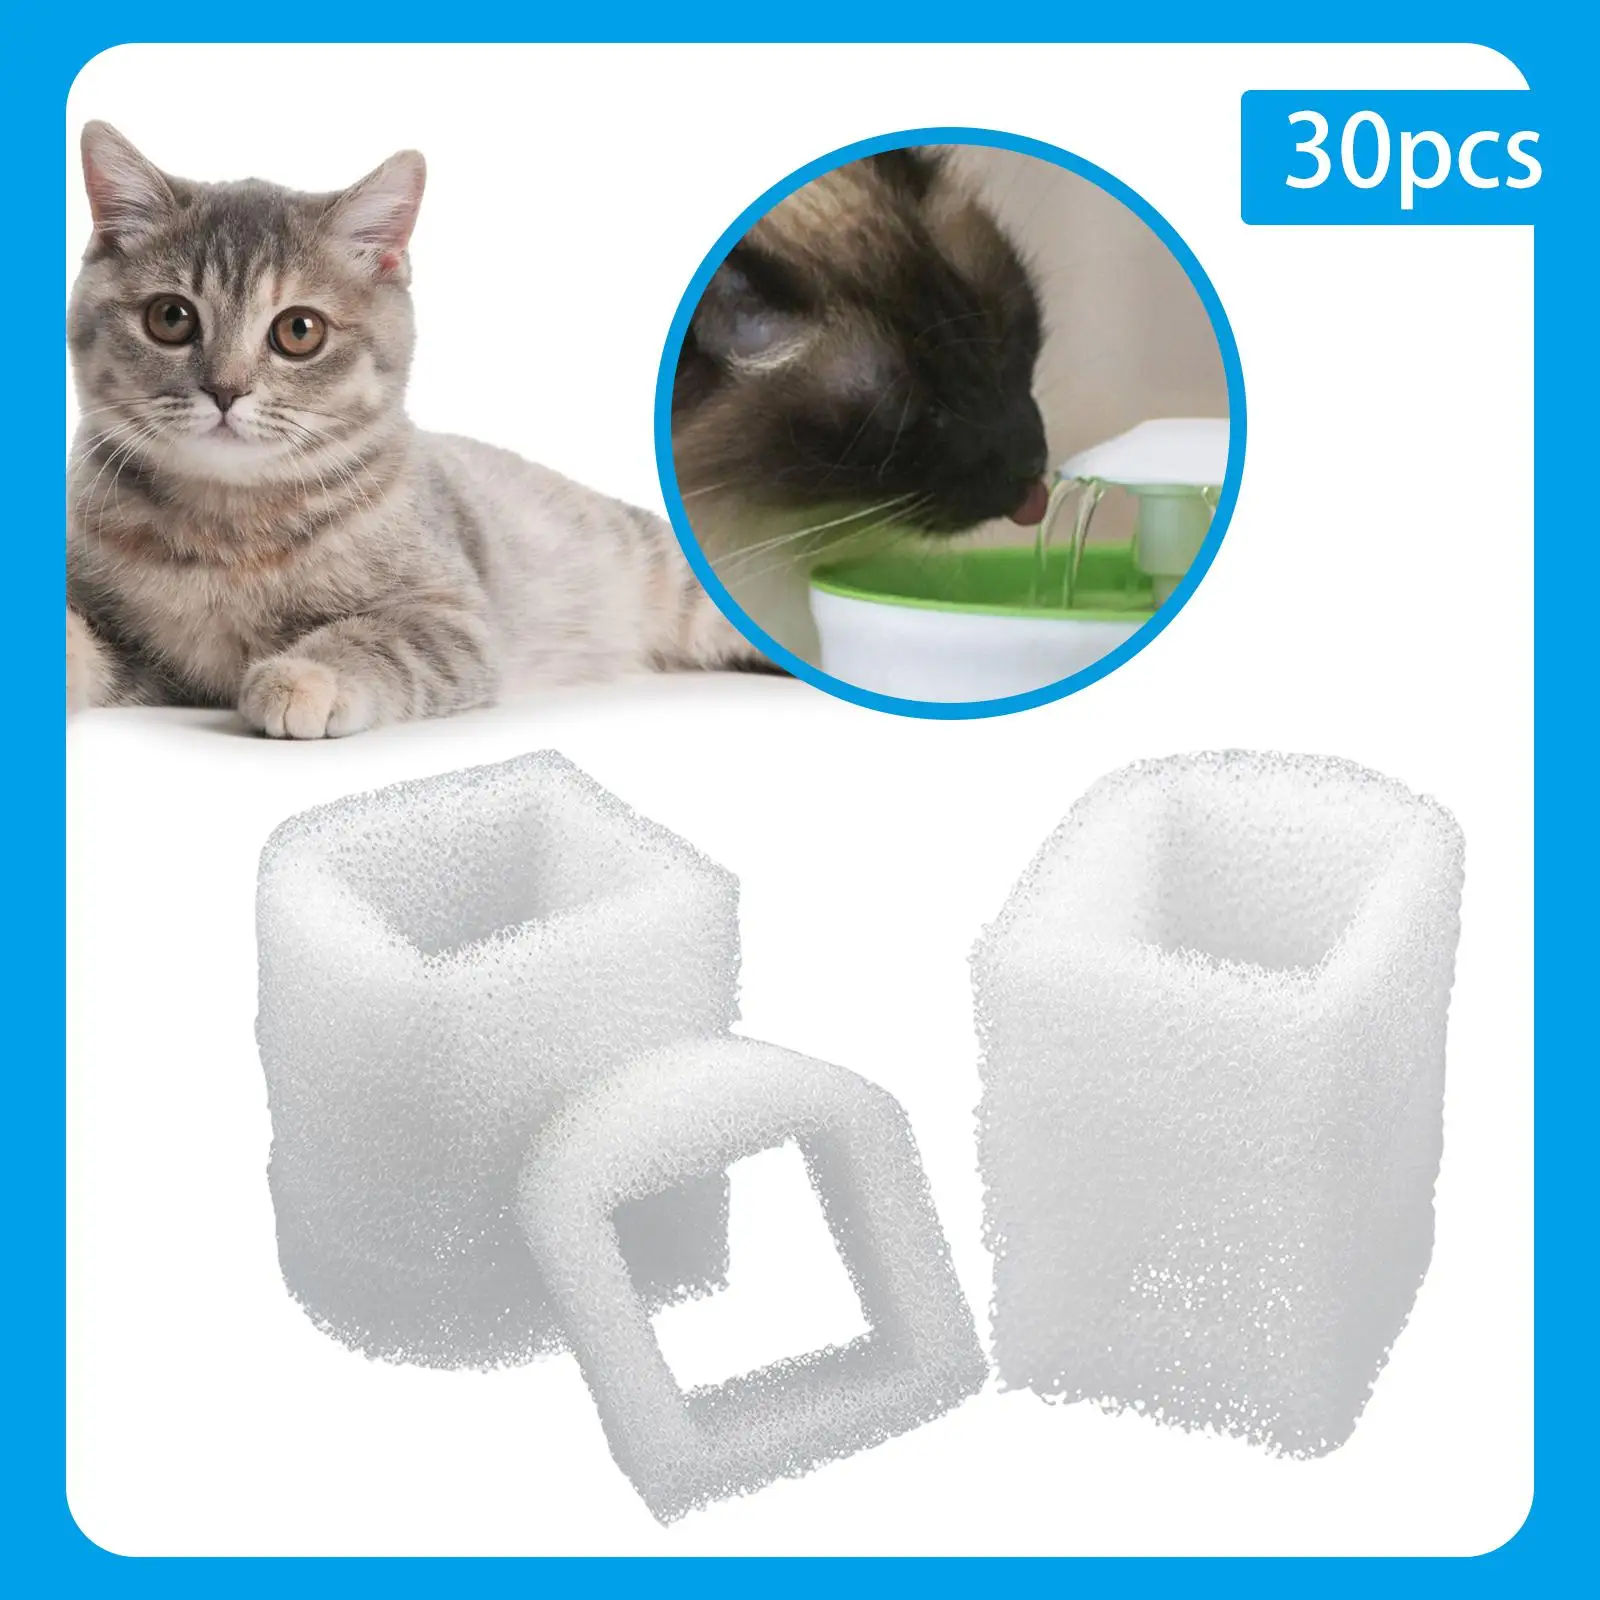 30Pcs Replace Filters Filter Element Water Dispenser Filter Element for Cat Water Fountain Feeding Station Waterer